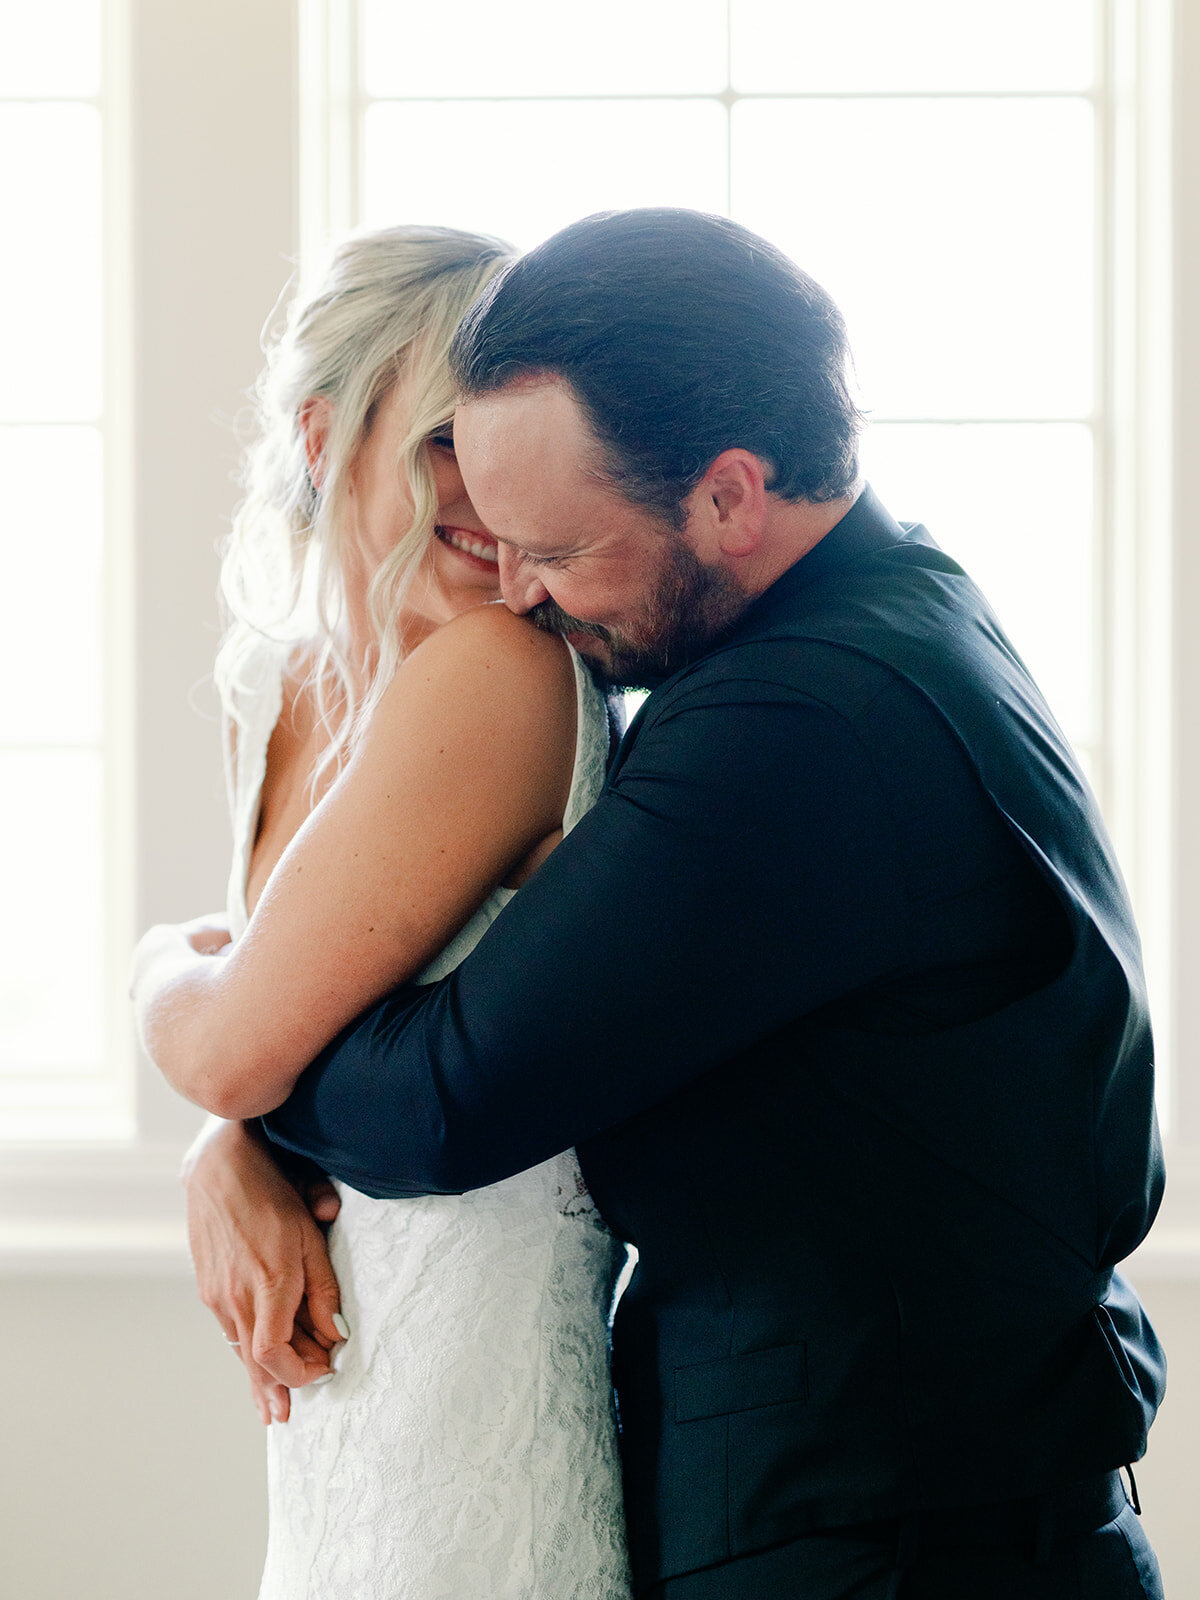 Bride and groom share an intimate moment as they embrace eachother